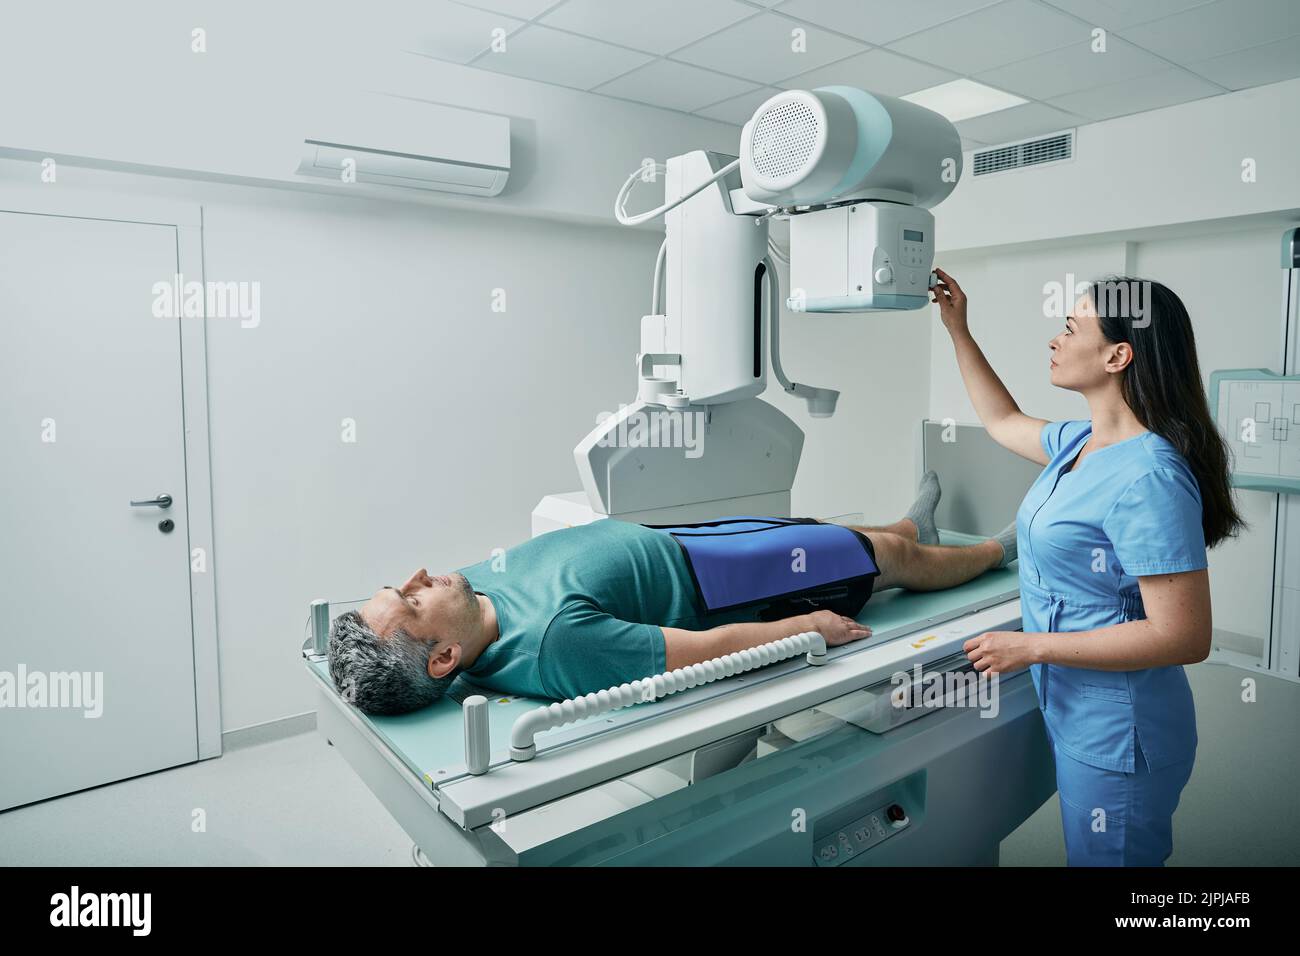 Male patient lying on bed while female nurse adjusting modern X-ray machine for scanning his leg or knee for injuries and fractures Stock Photo